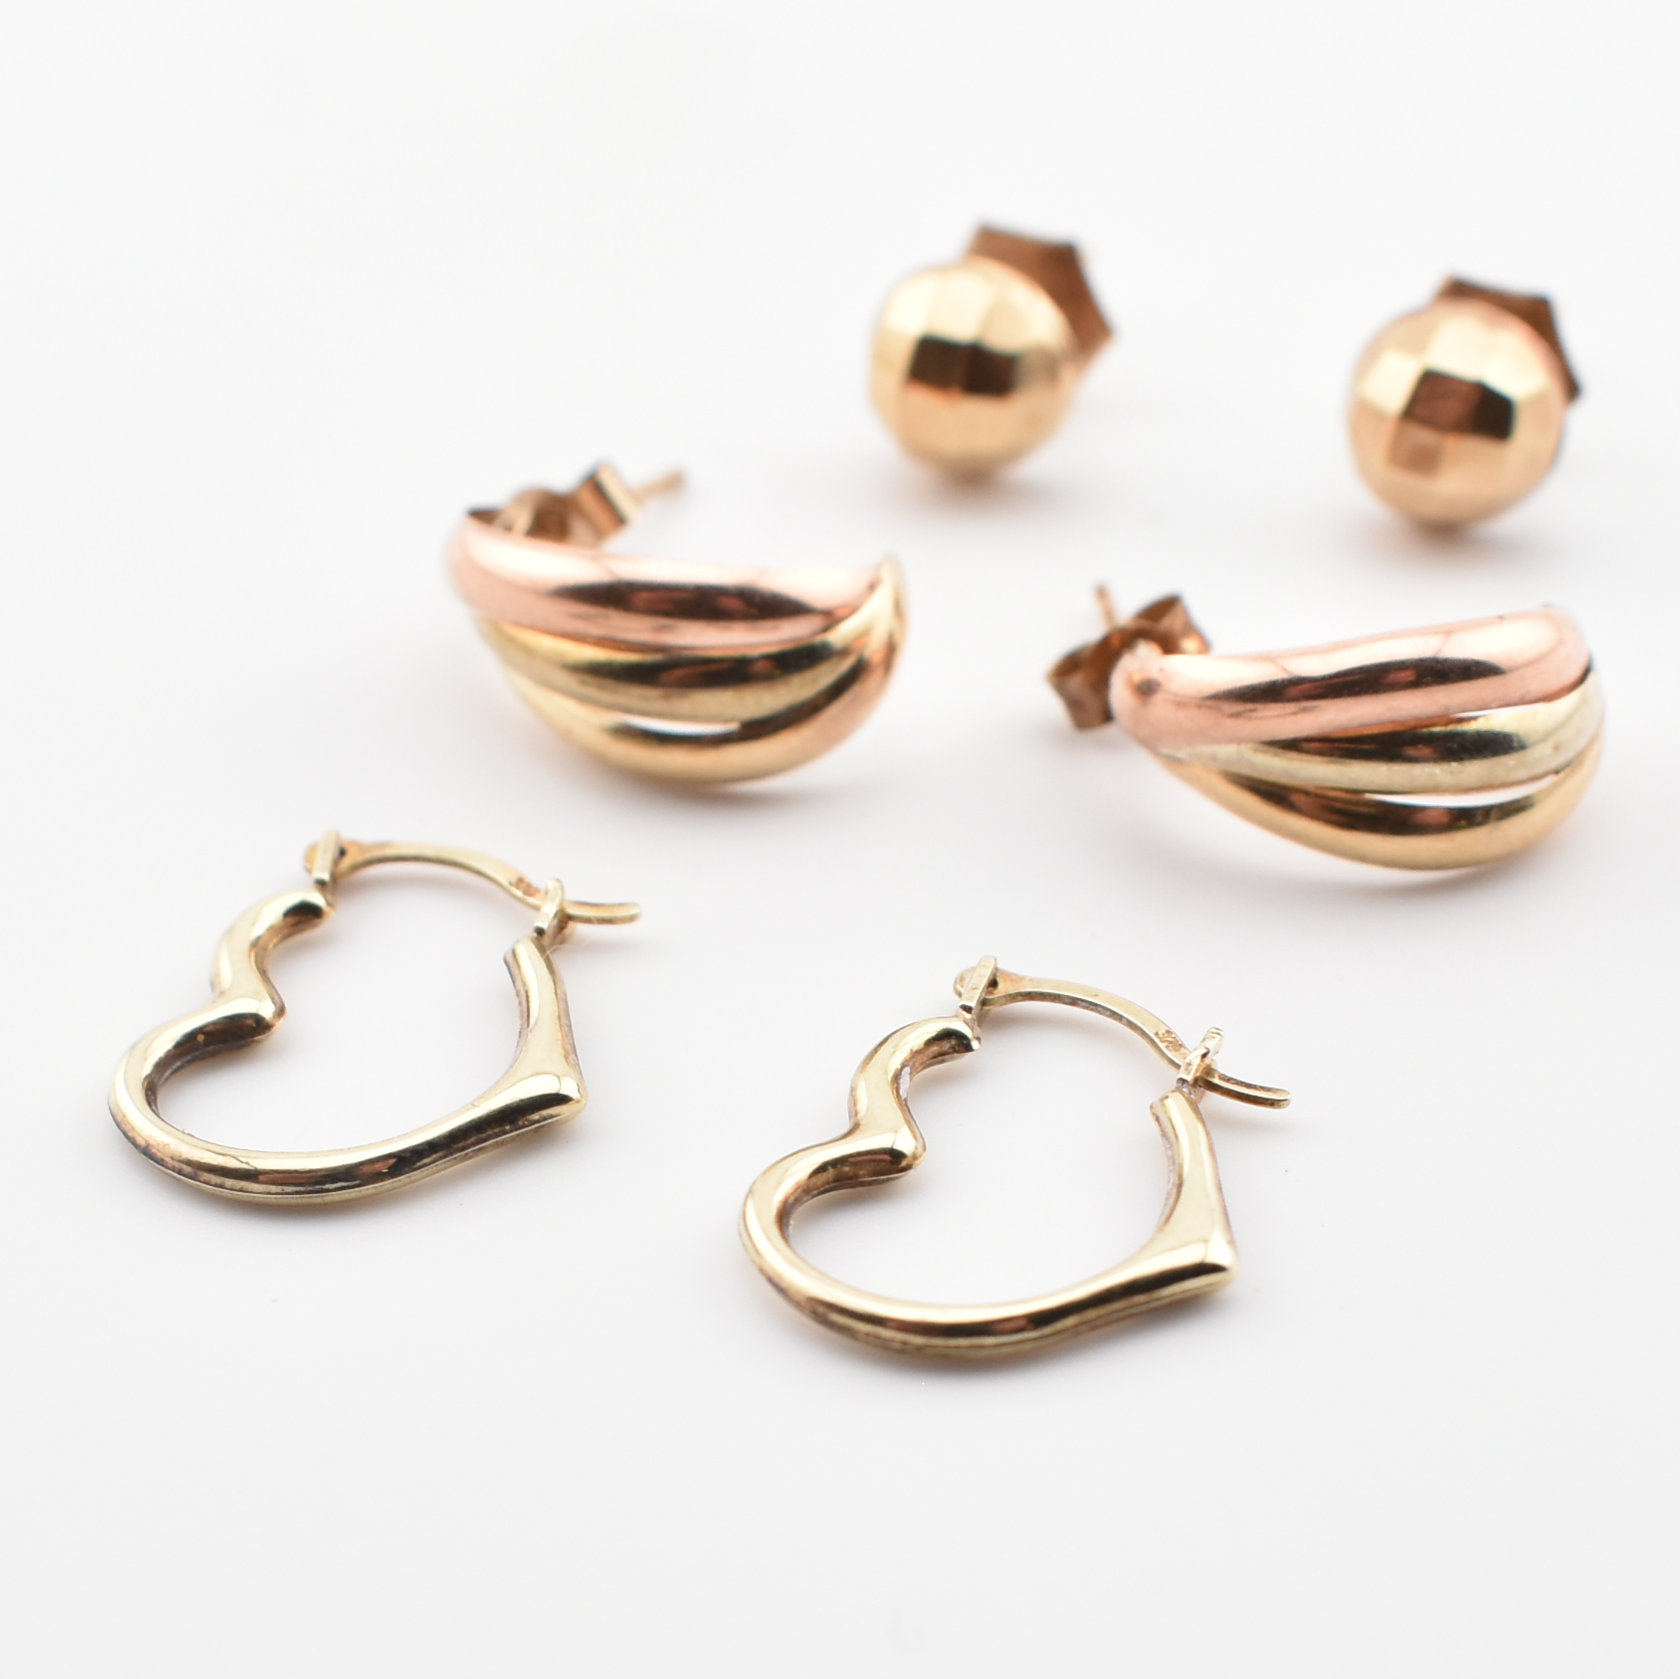 THREE PAIRS OF 9CT GOLD EARRINGS - Image 3 of 4